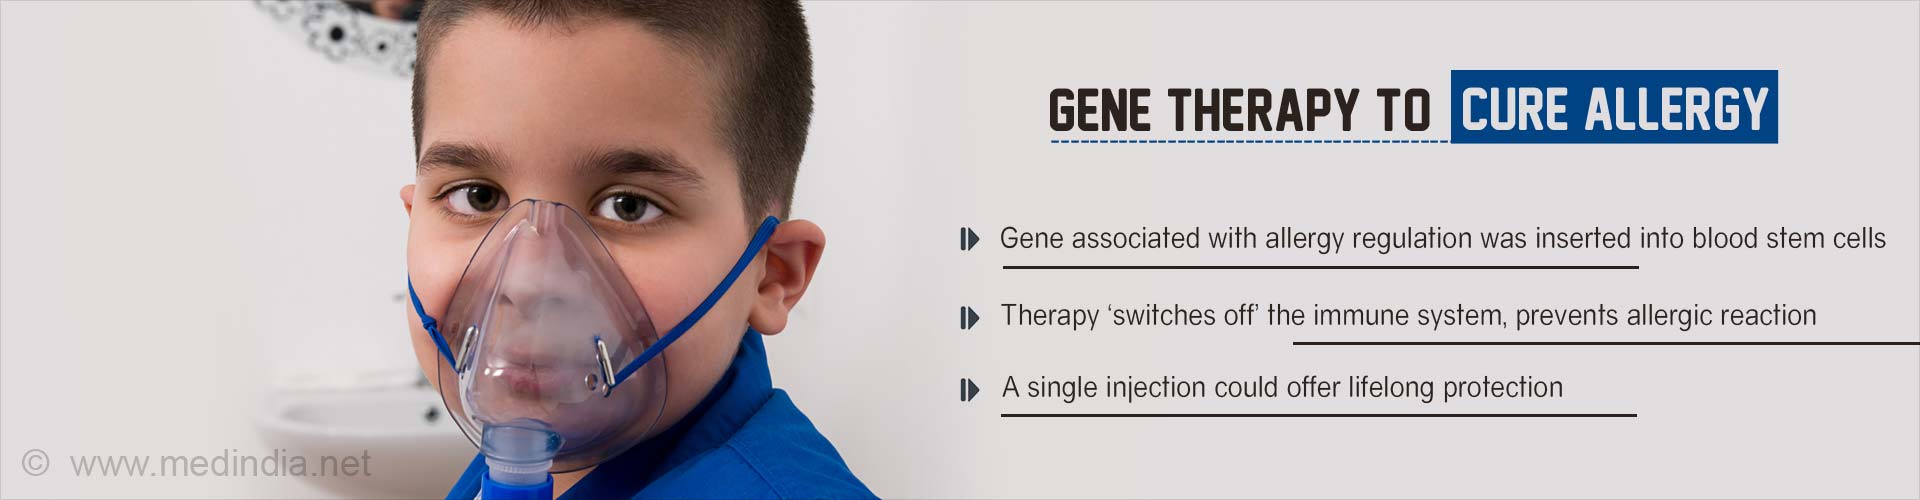 Gene therapy to cure allergy
- Gene associated with allergy regulation was inserted into blood stem cells
- Therapy 